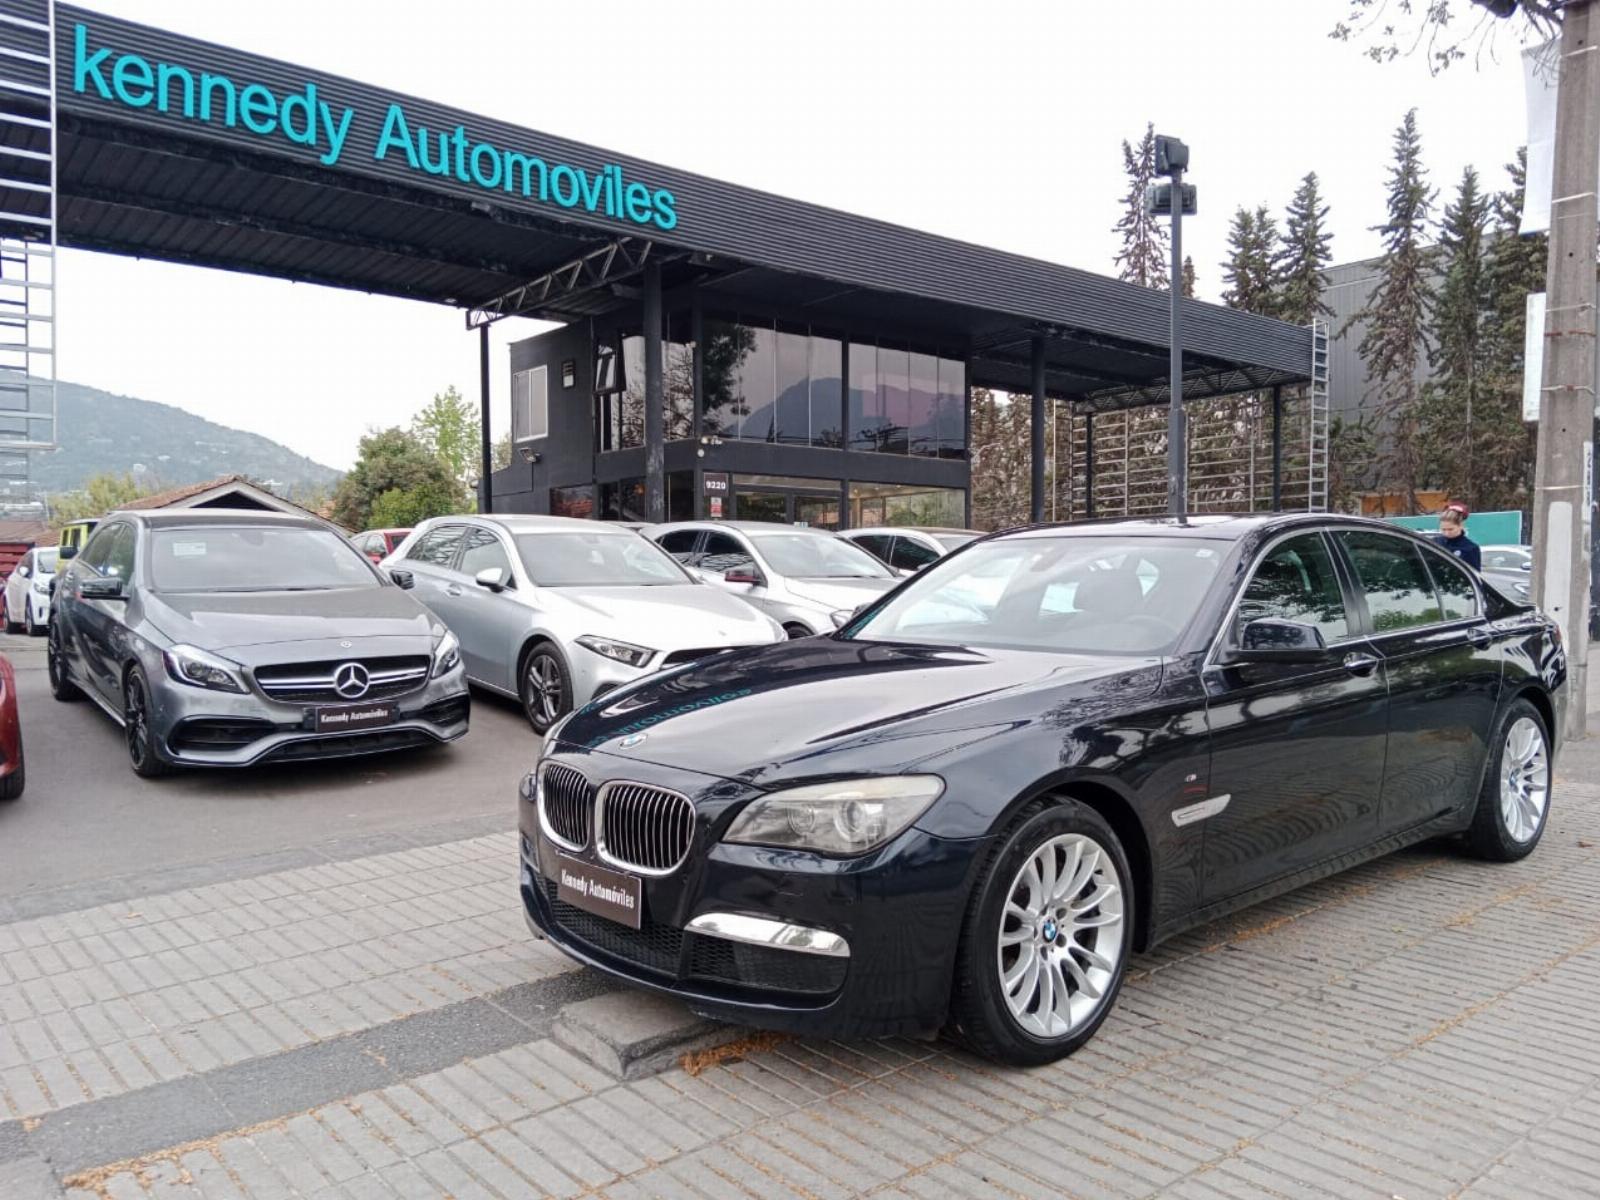 BMW 730 730 I Auto 2013 Impecable  - KENNEDY AUTOMOVILES